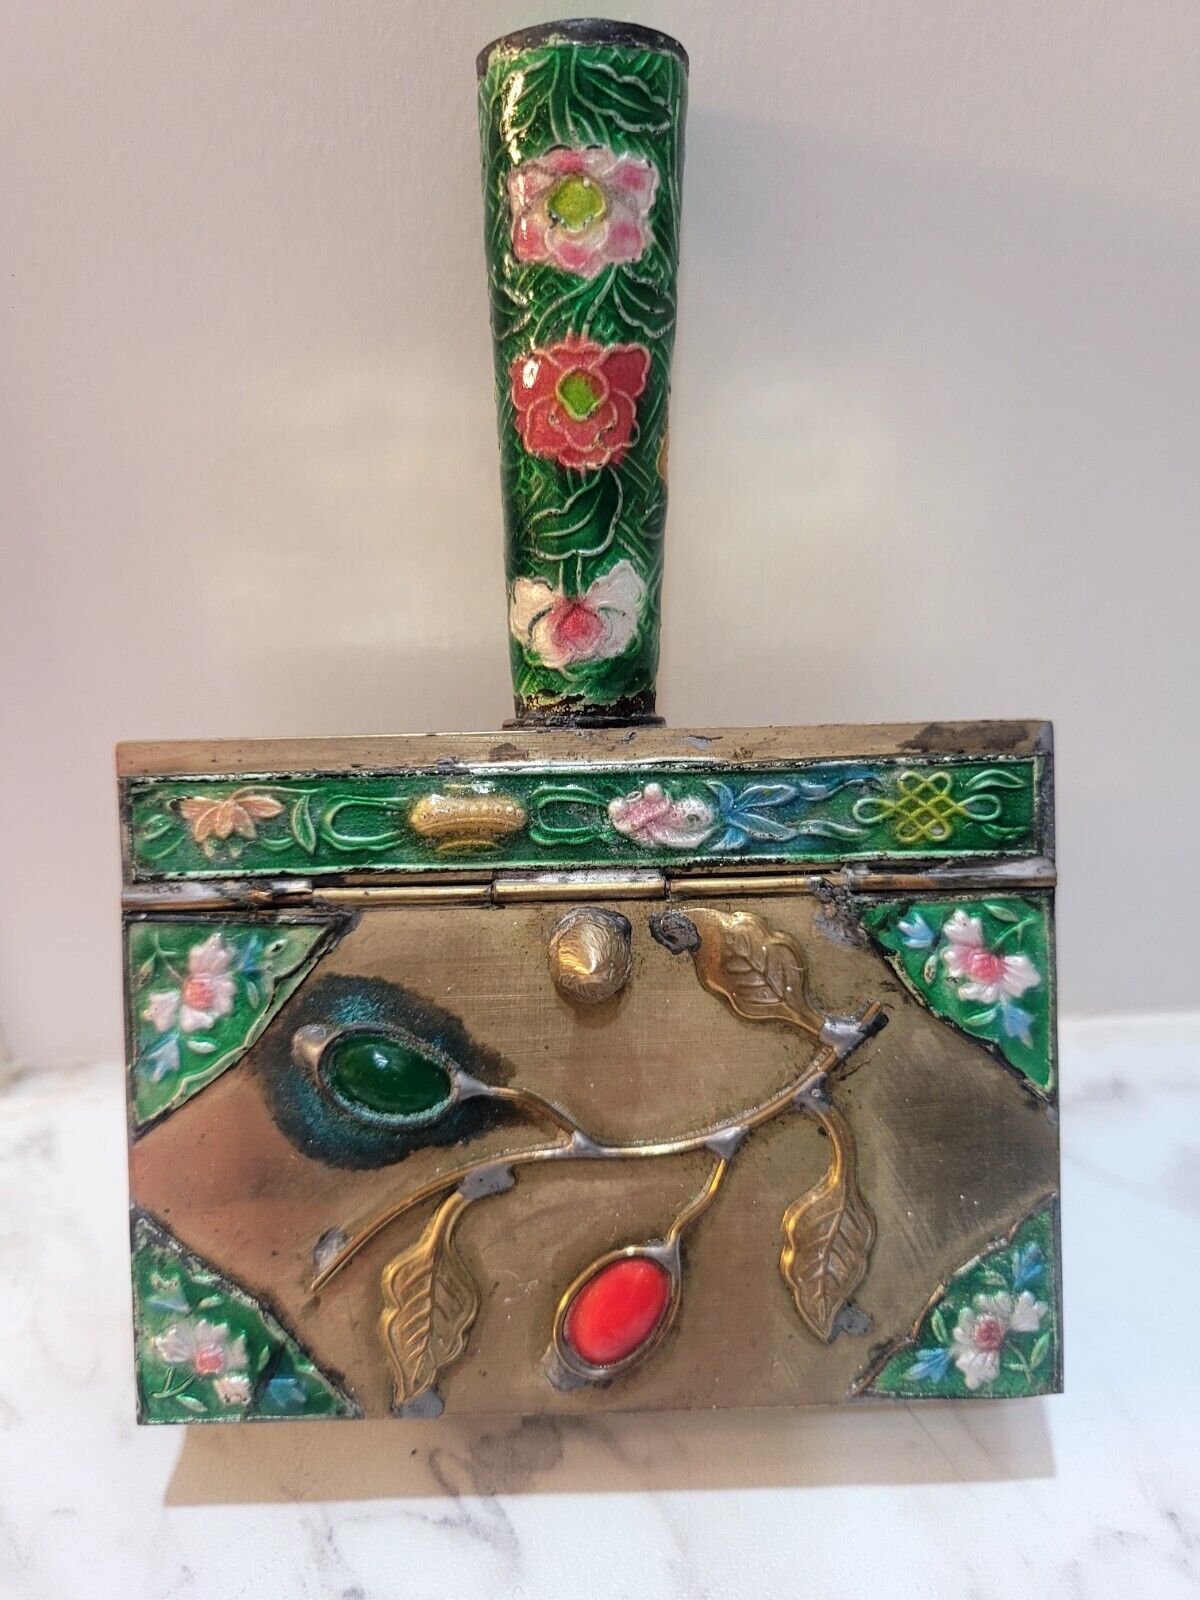 Vintage Cloisonné Lidded & Hinged Box Makeup Compact with Handle China Enamel